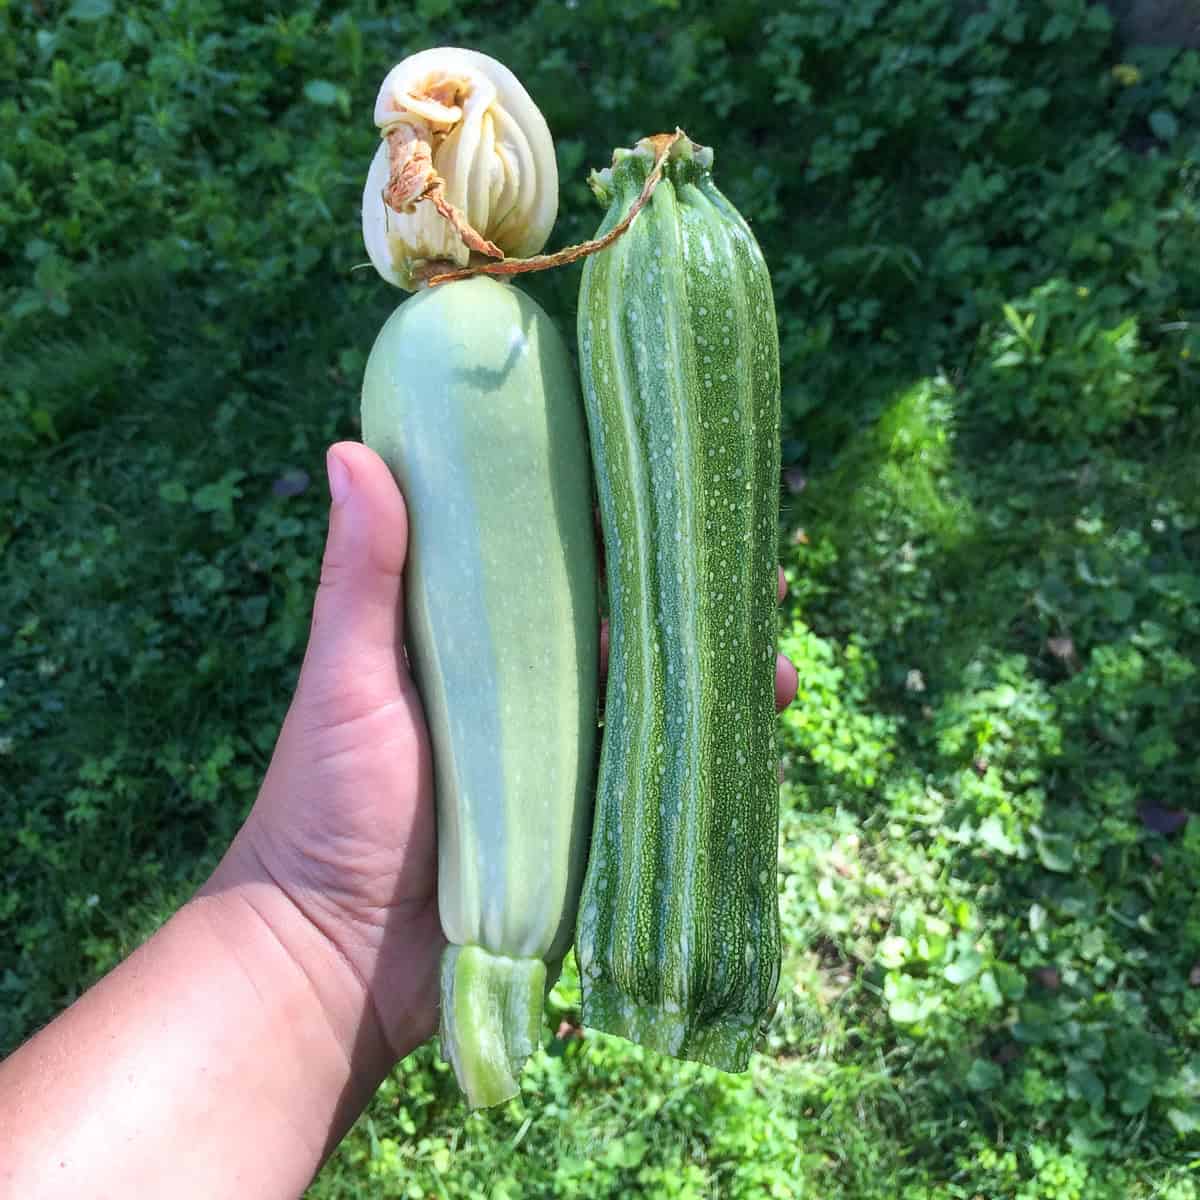 An image of a woman's hand holding two zucchinis.